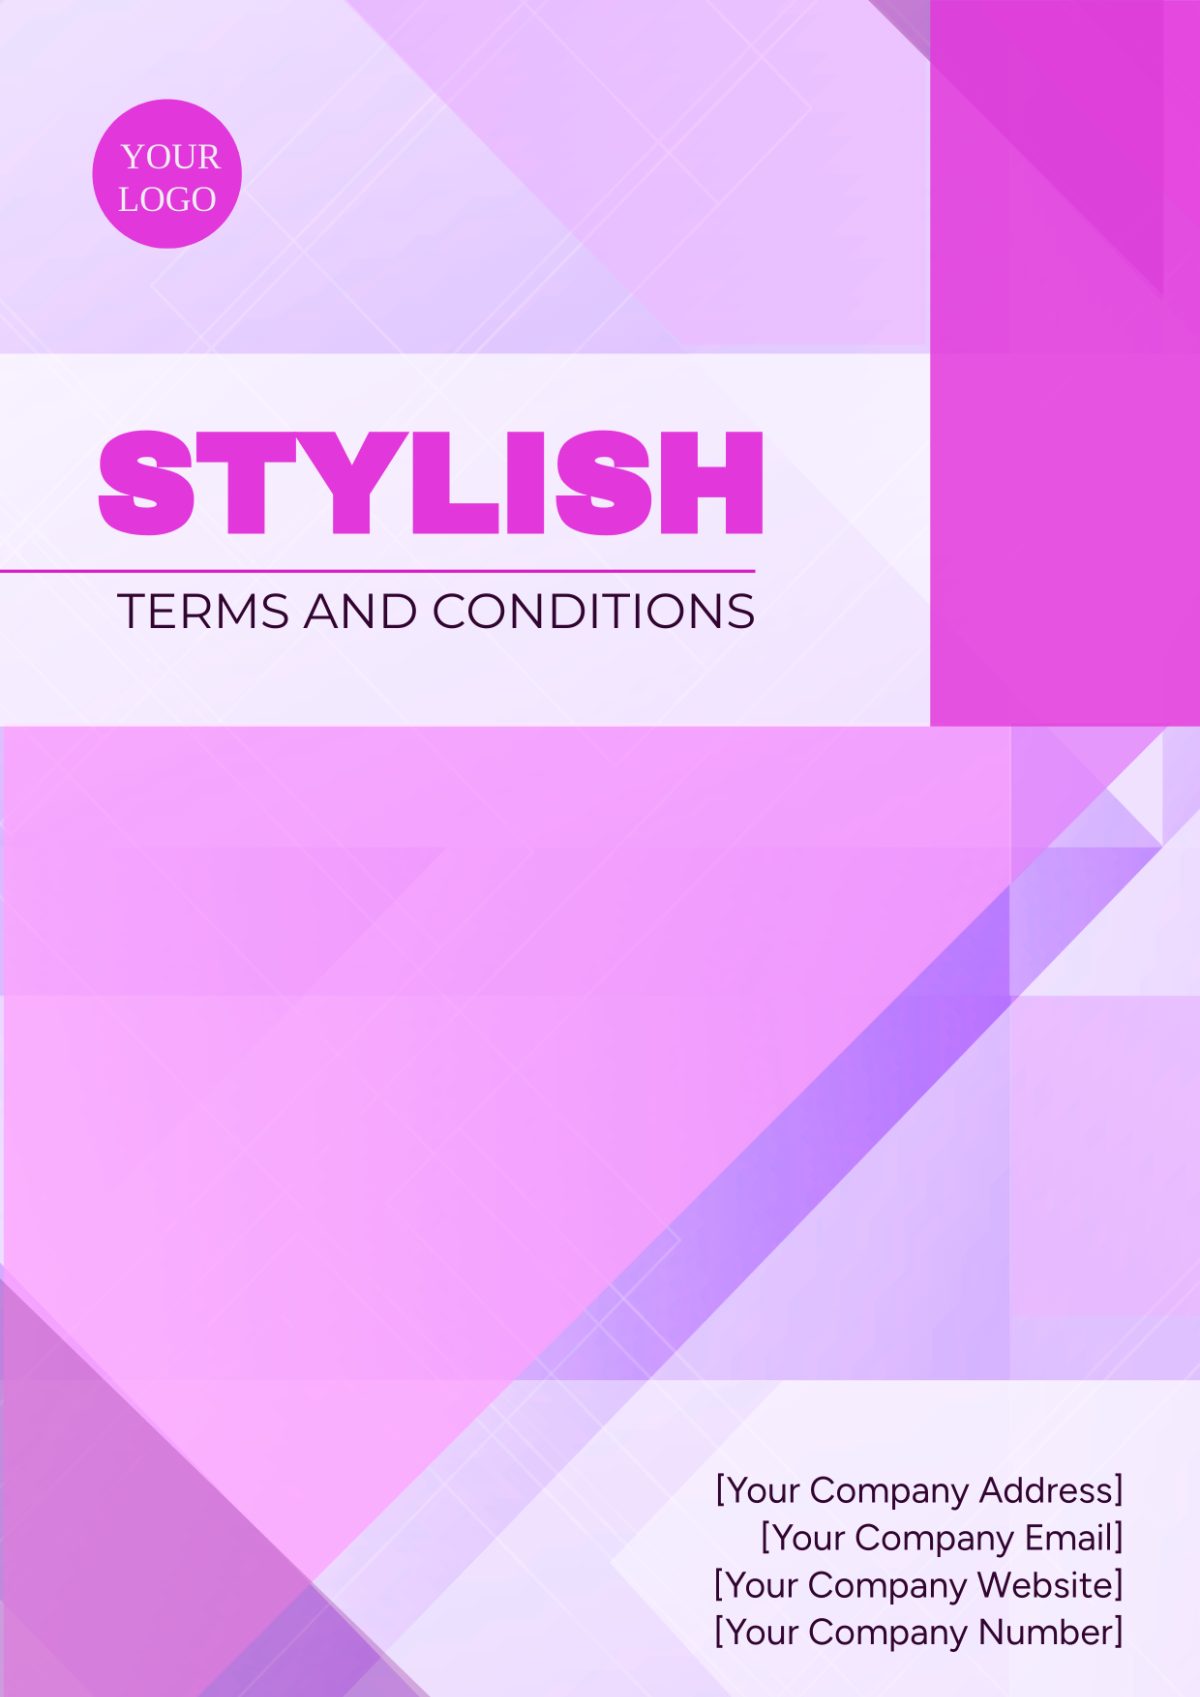 Stylish Terms and Conditions Cover Page